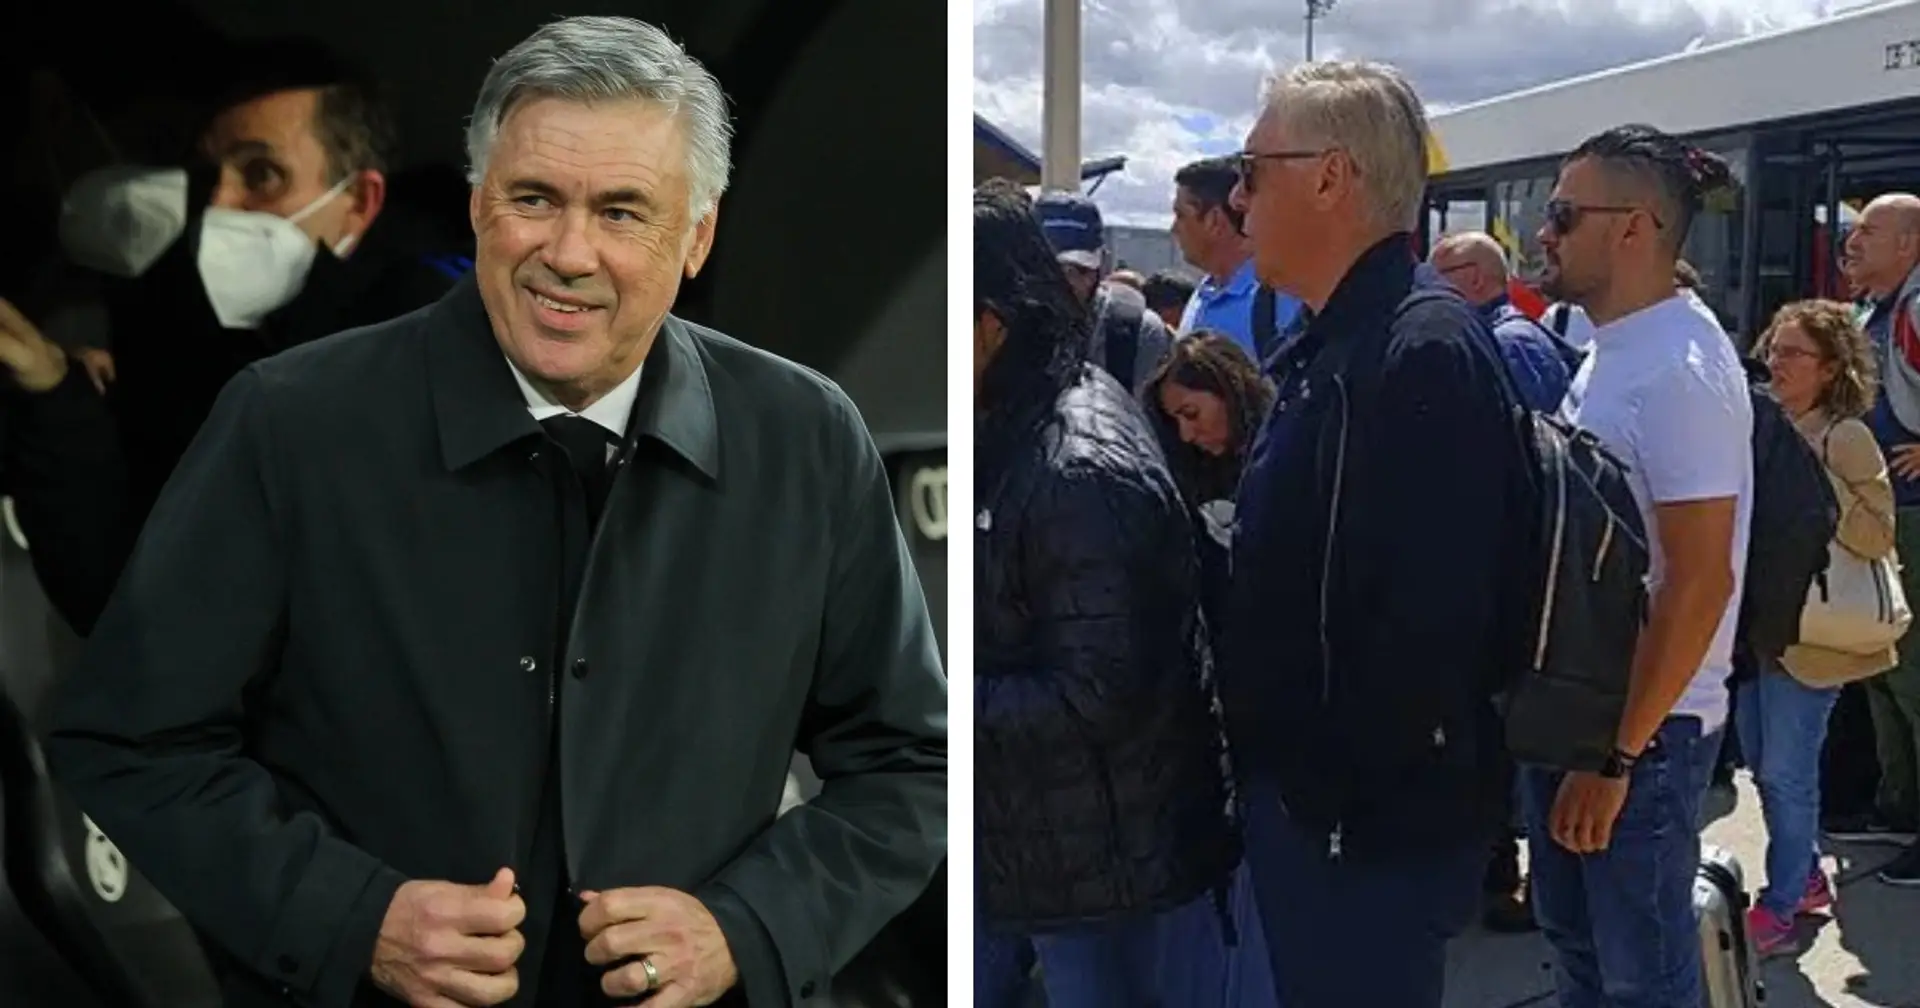 Carlo Ancelotti spotted in Italy - why is he there? 